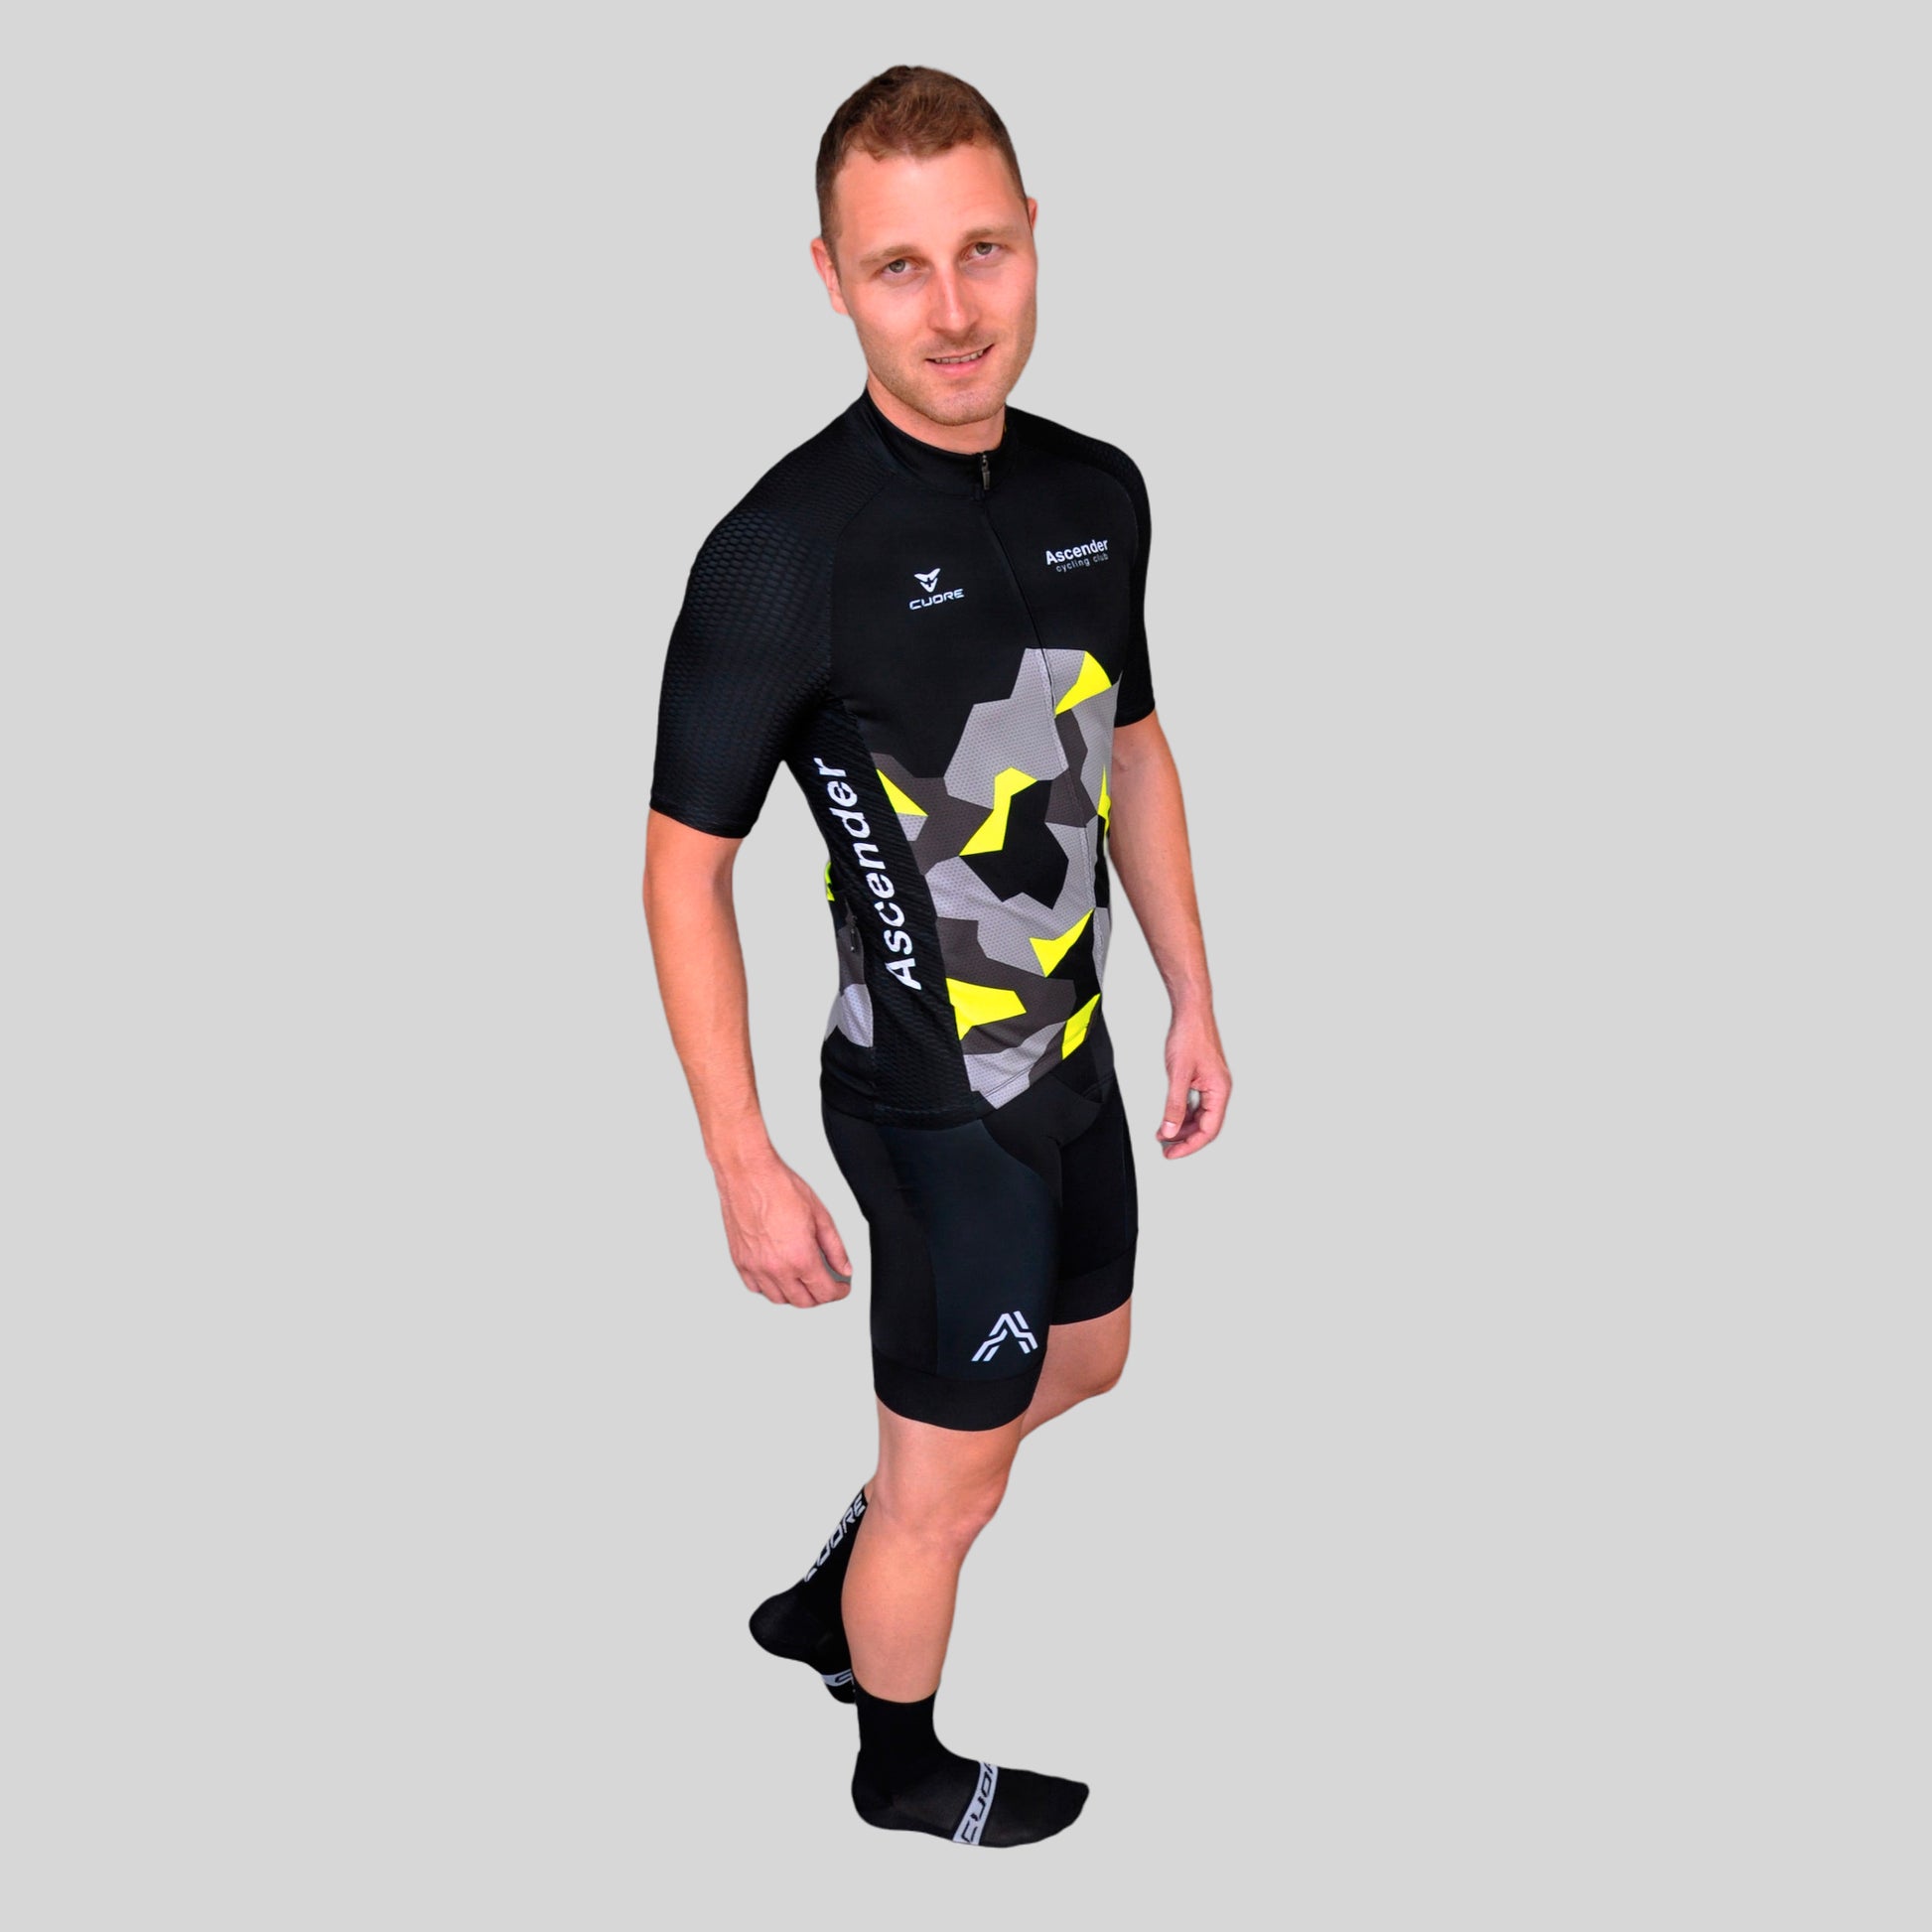 Lightning Bolt Camo Neon Yellow Short Sleeves Jersey from Ascender Cycling Club Side Monogram